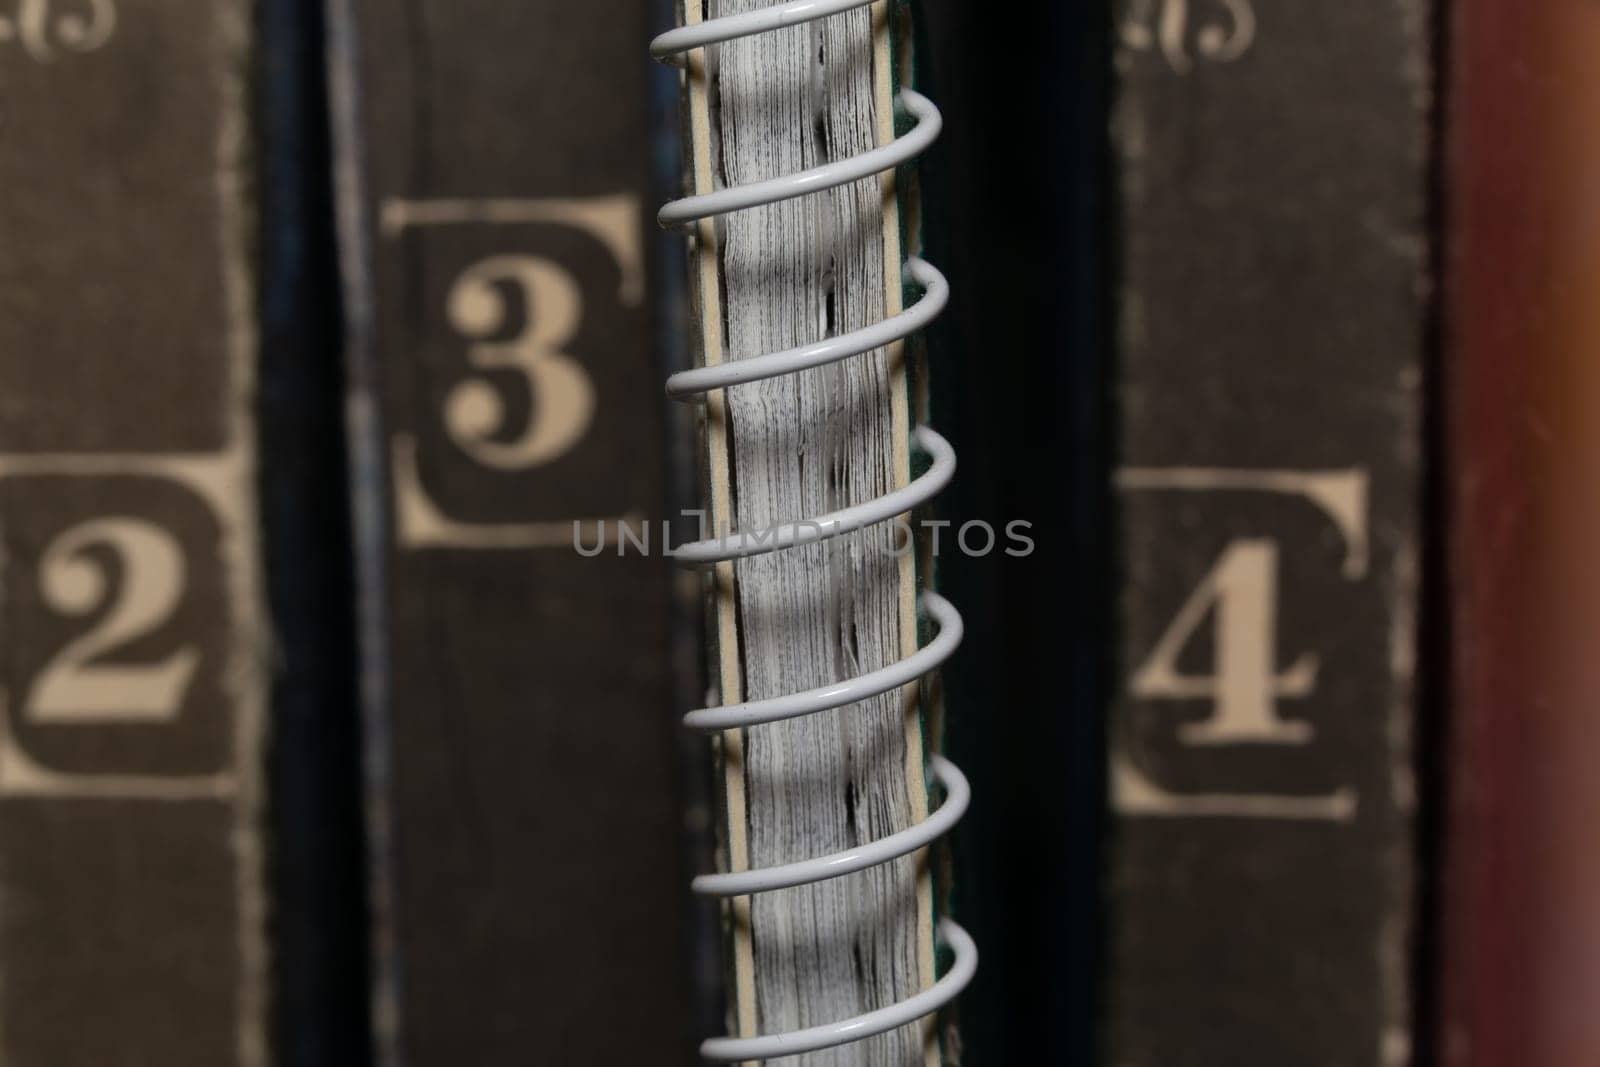 A spring-loaded notebook among old brown book volumes, close-up macro view